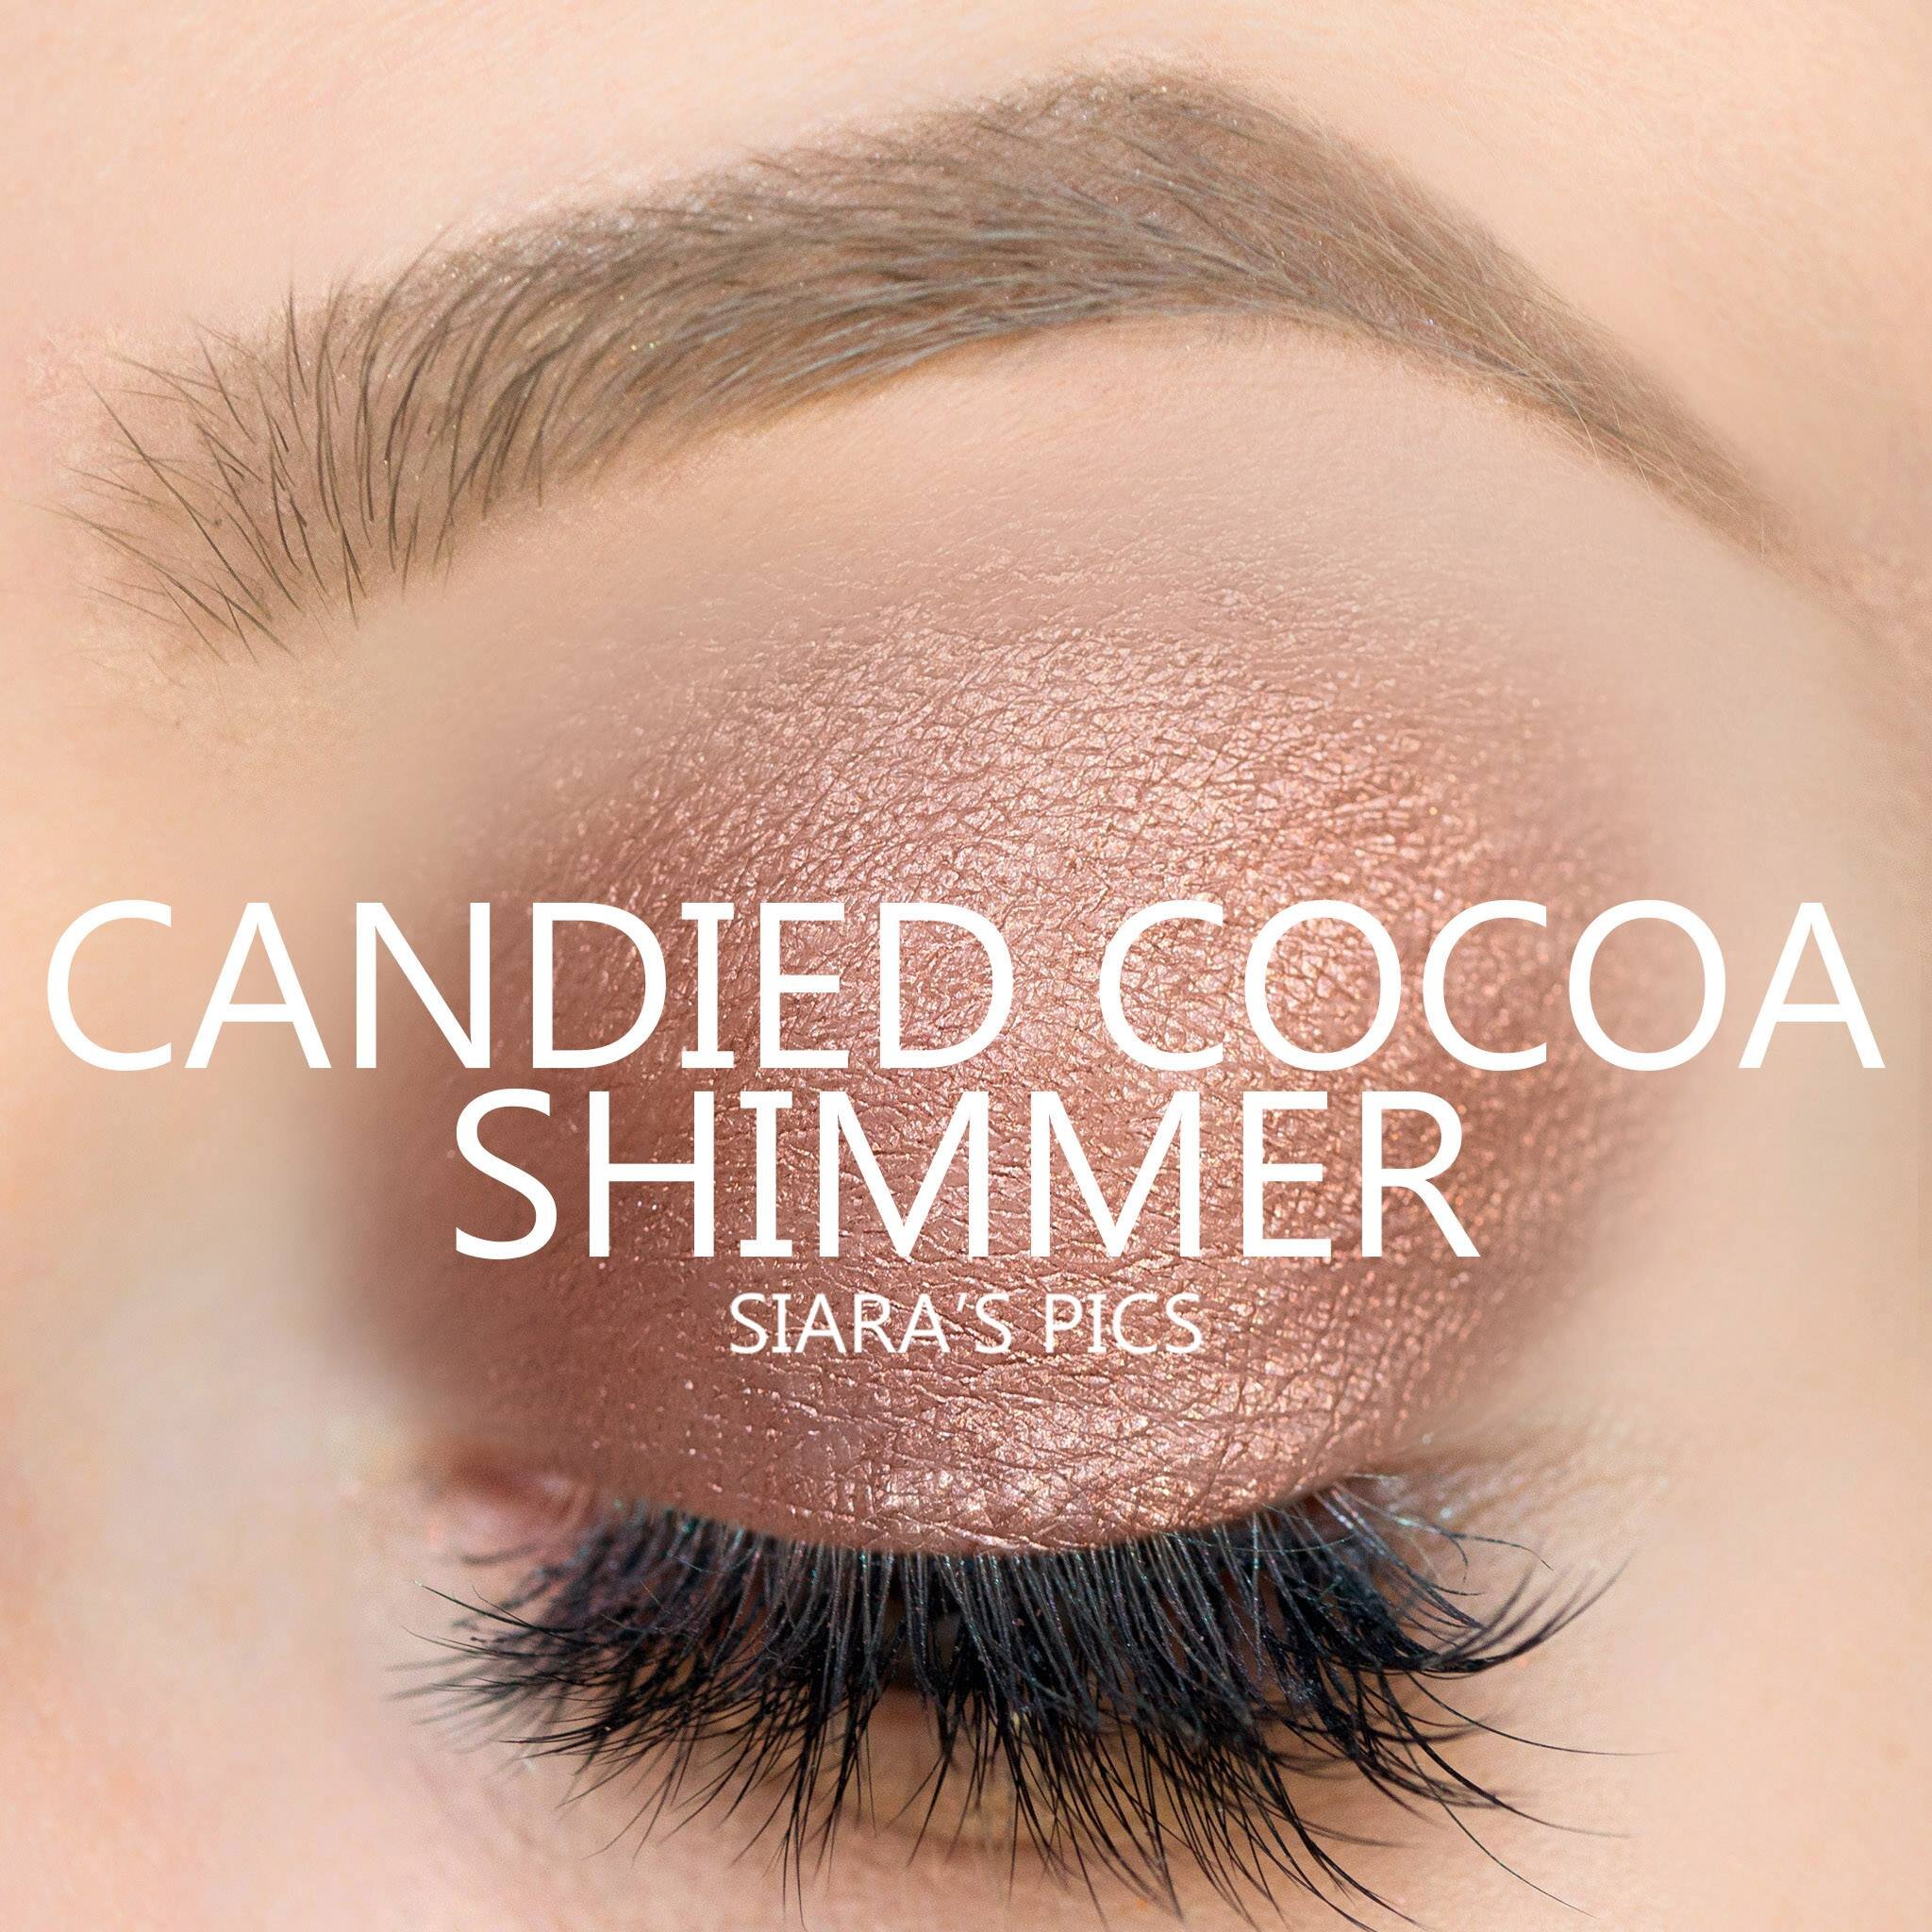 Candied Cocoa Shimmer.jpg